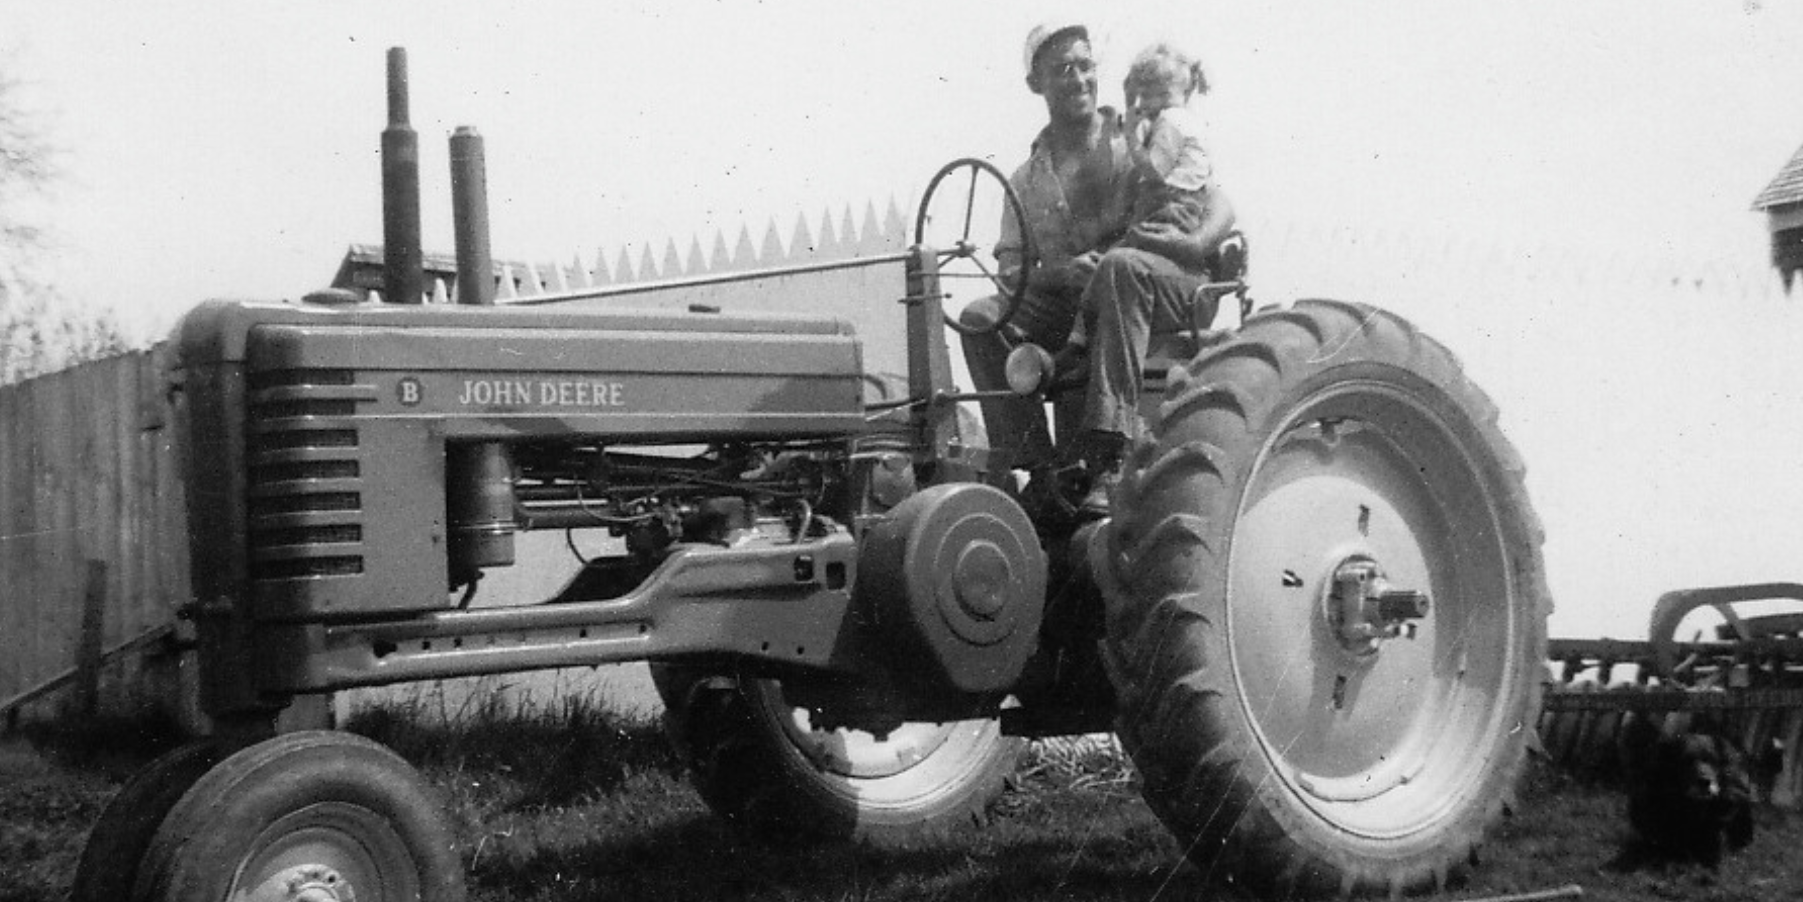 Old black and white image of a man and child on an old john deere tractor in Somerville, Maine.